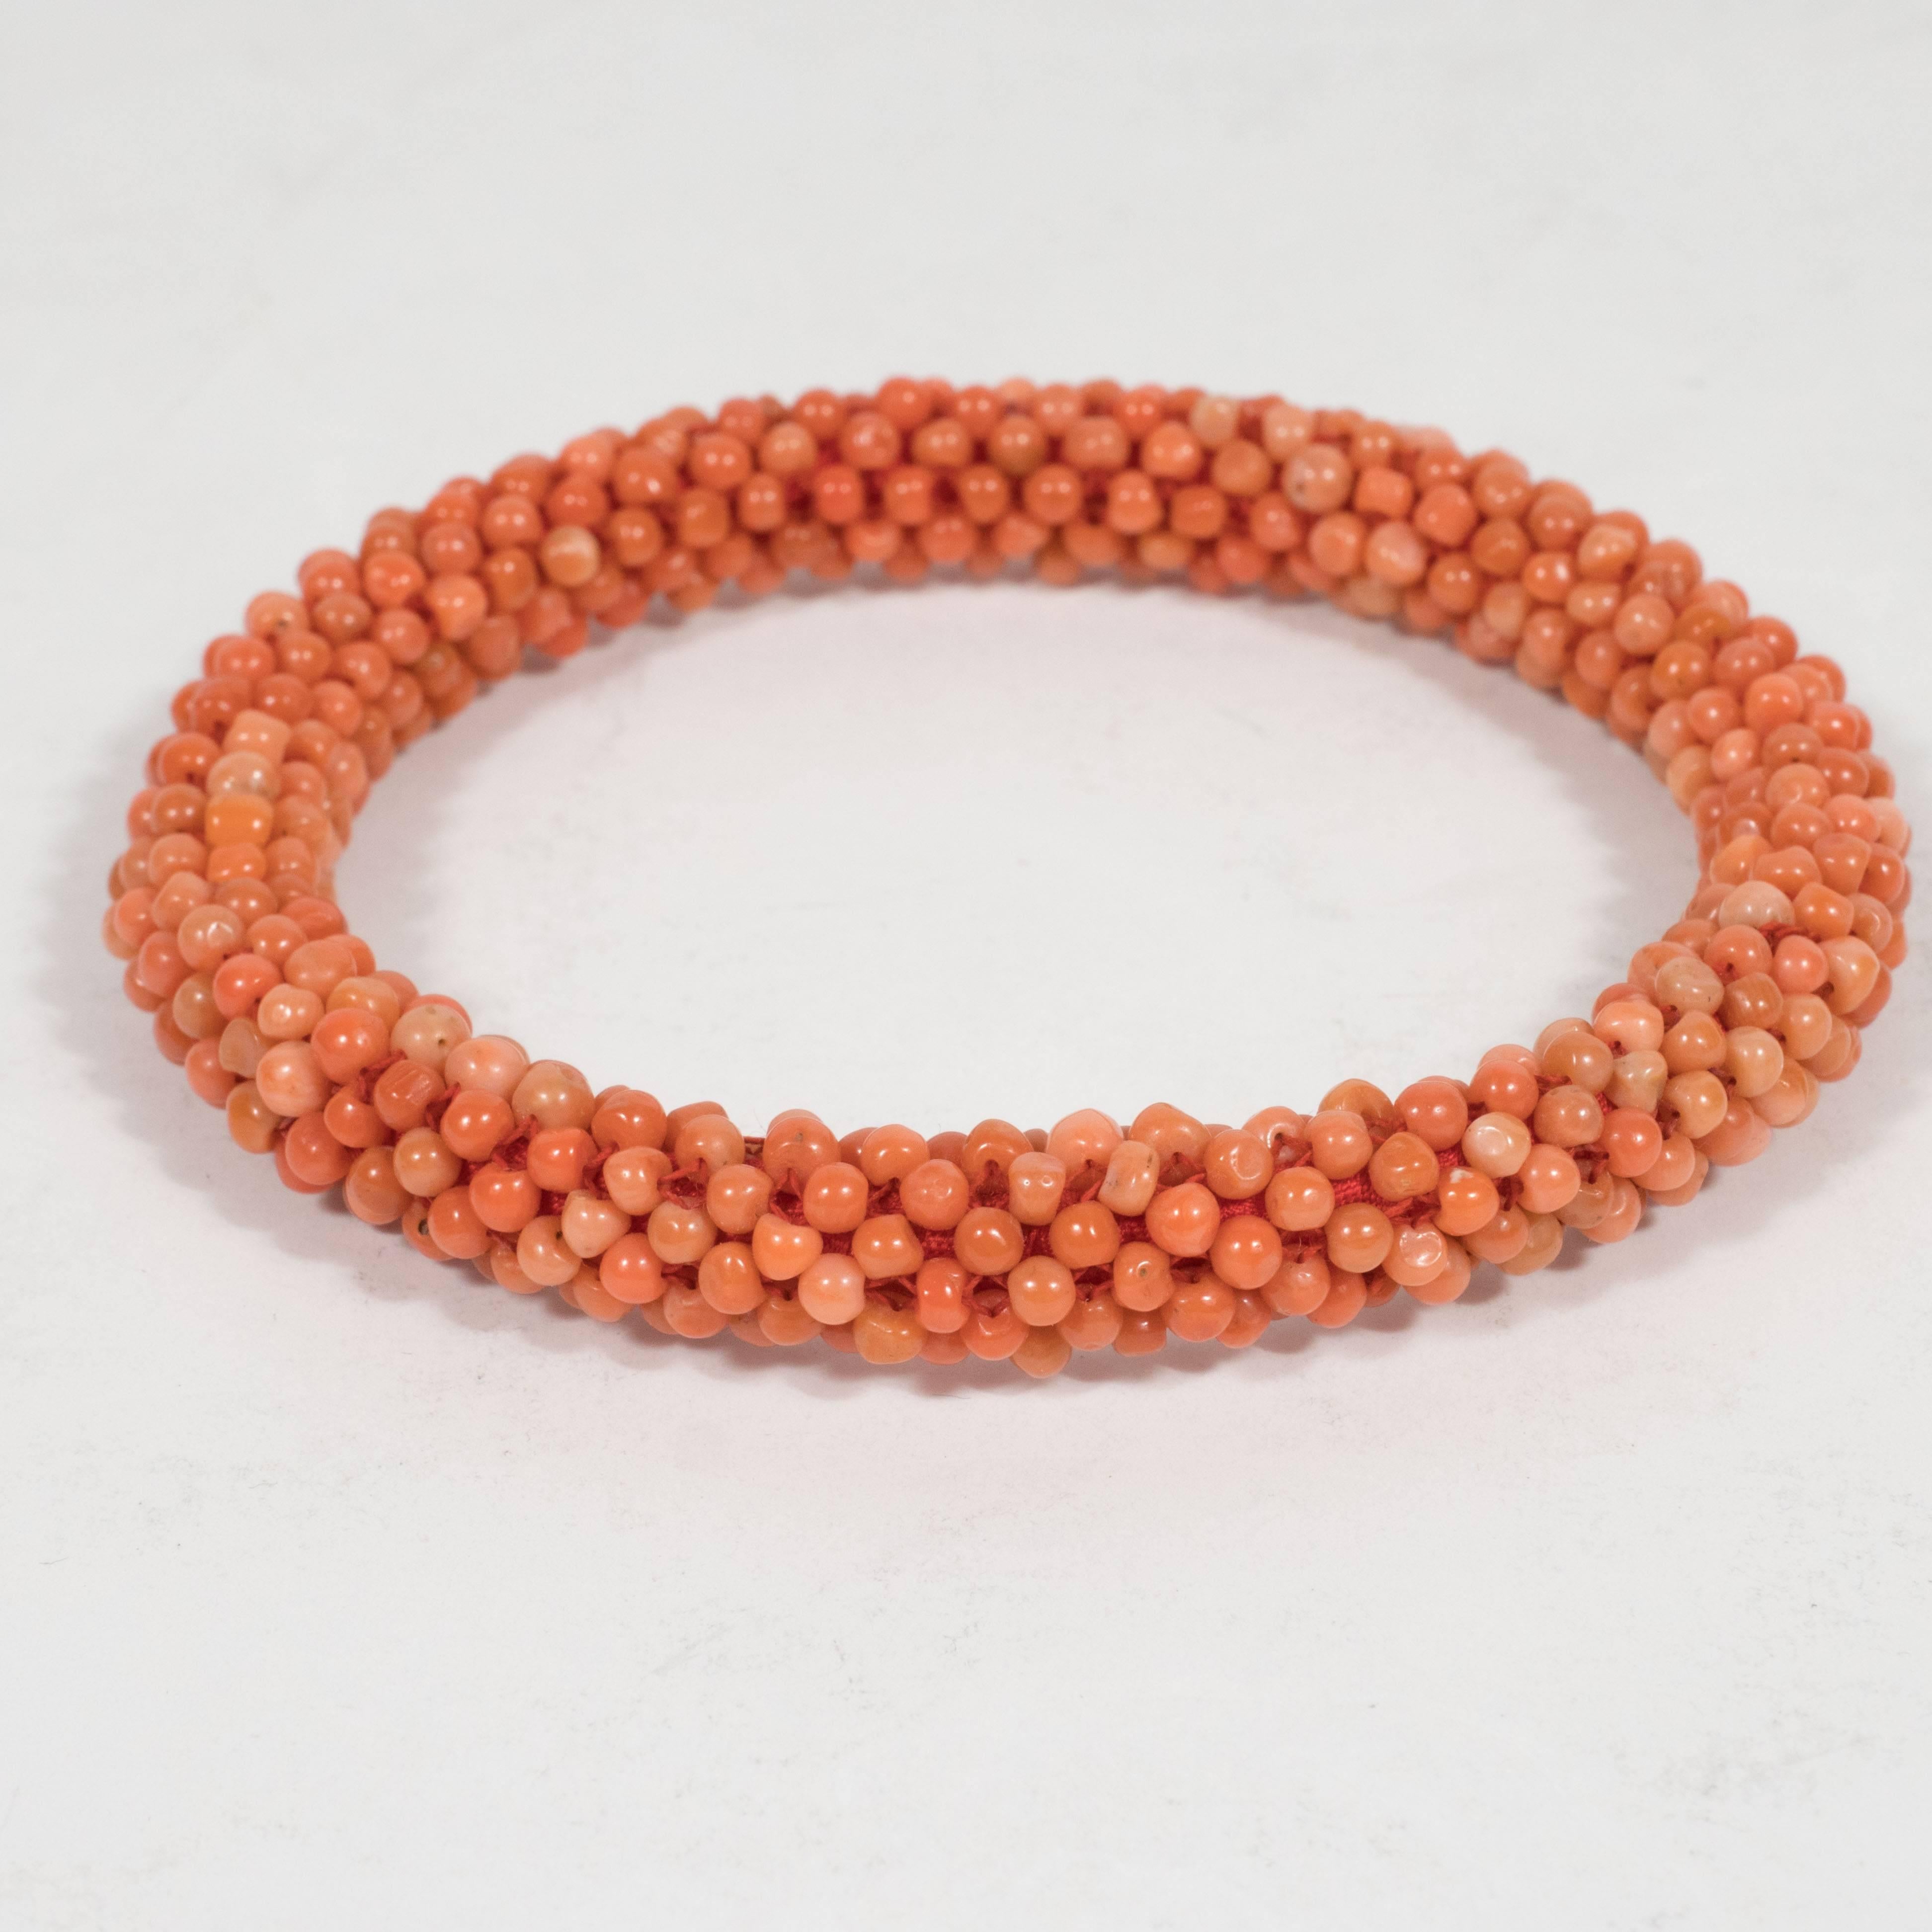 This magnificent bracelet showcases the intrinsic beauty of the precious red coral with an abundance of hand polished beads relating the natural color variation of the material. Red coral has been appreciated by humanity since time immemorial. It